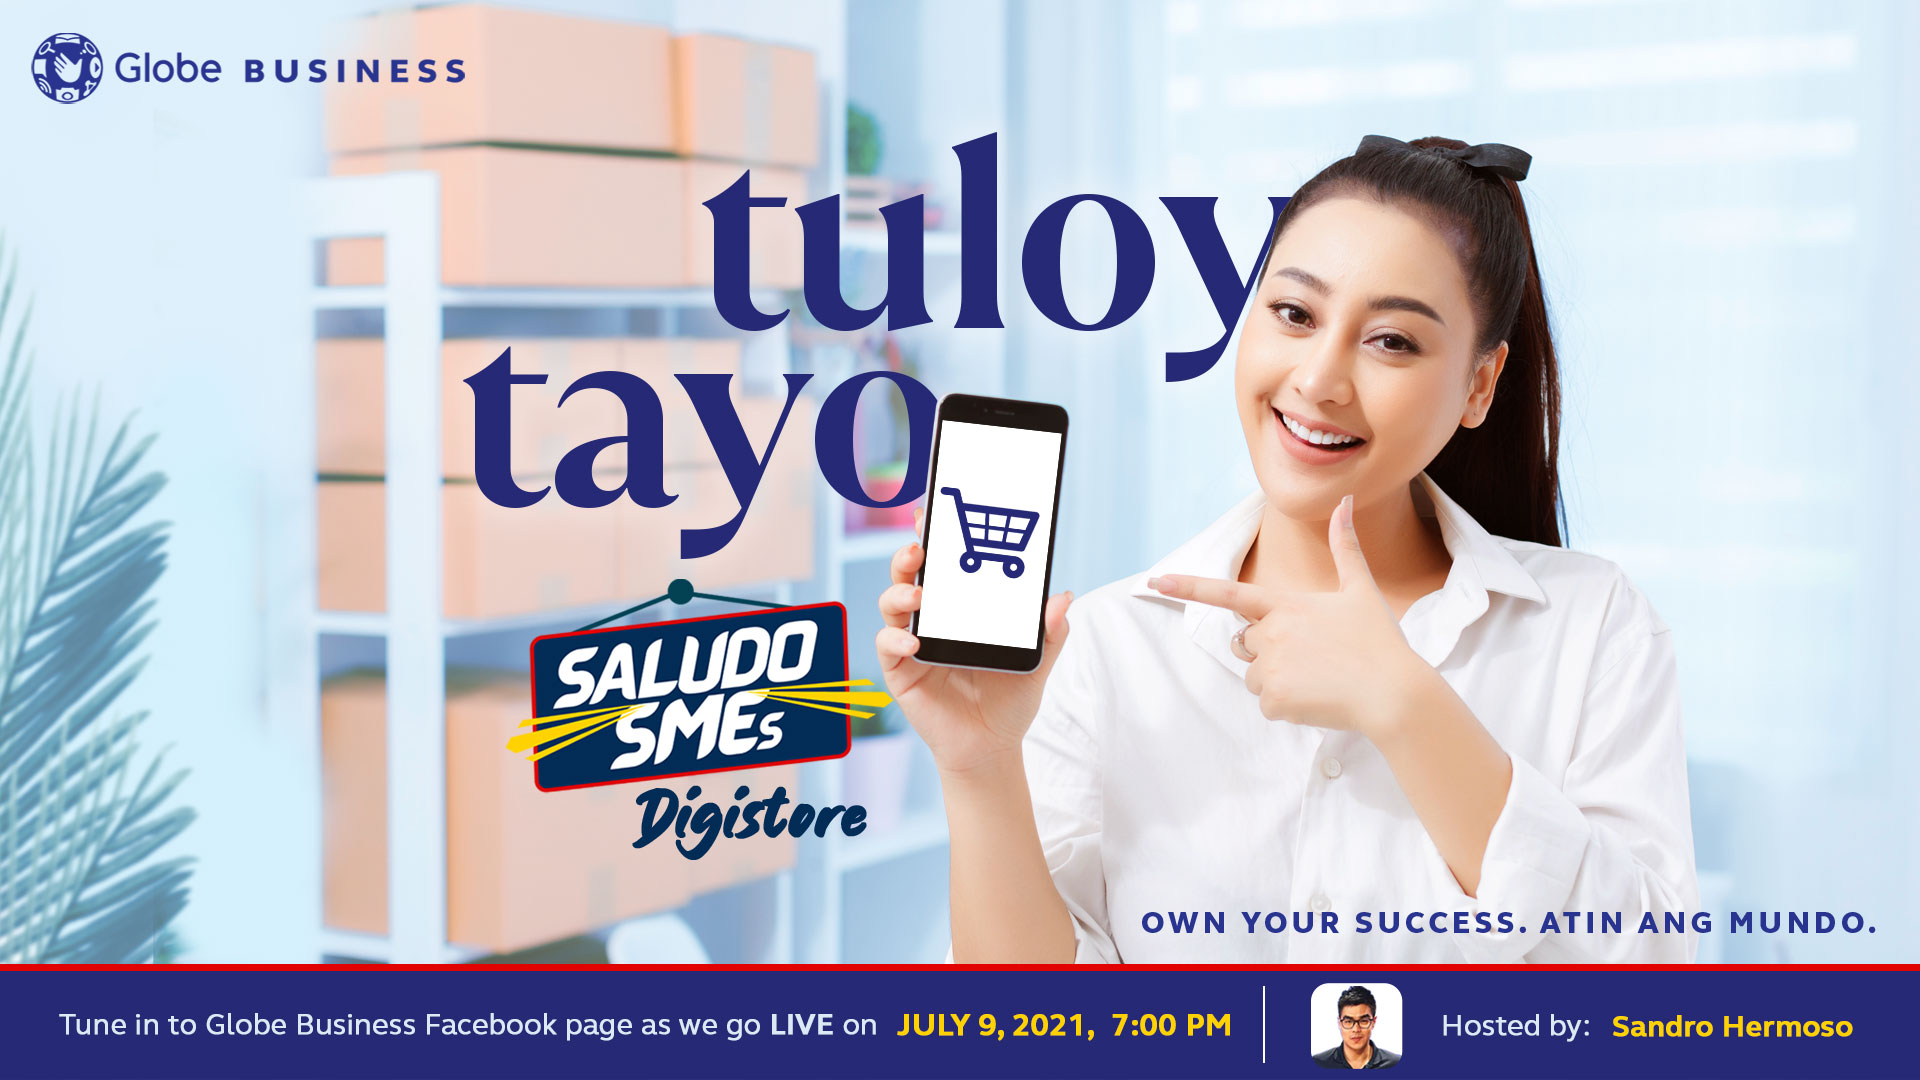 Globe Business to boost online sales of businesses   through Saludo SMEs Digistore